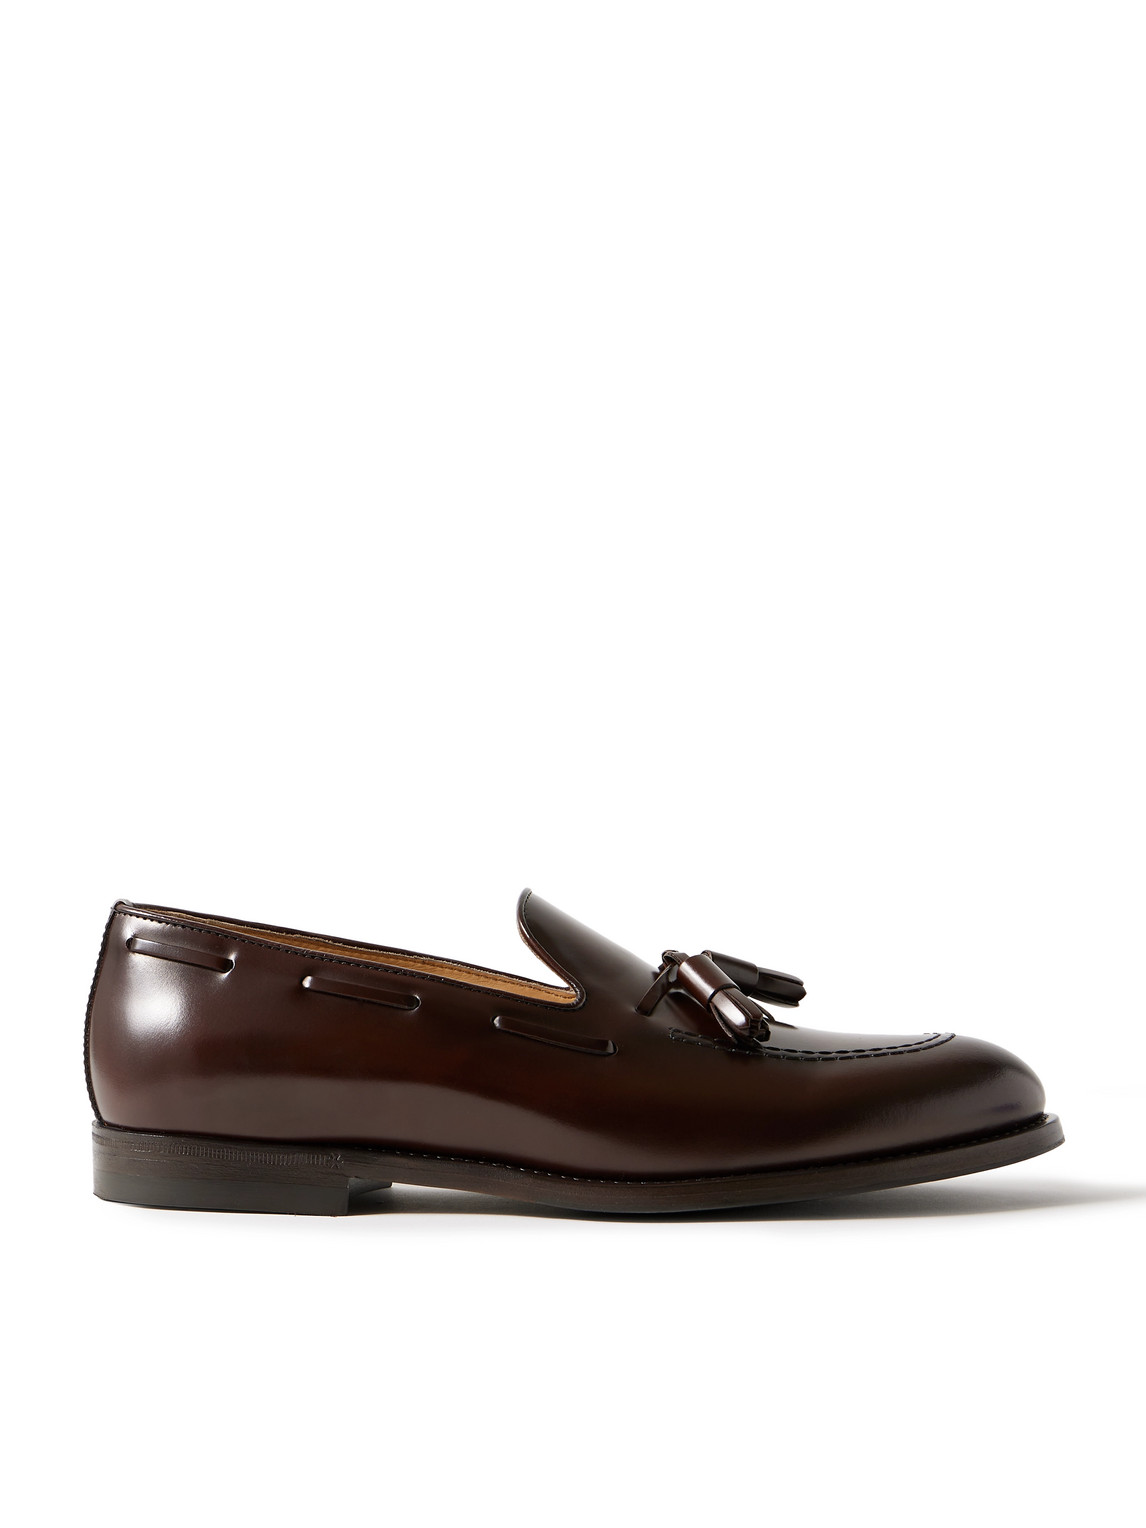 Brunello Cucinelli Rizzi Tasselled Leather Loafers In Brown